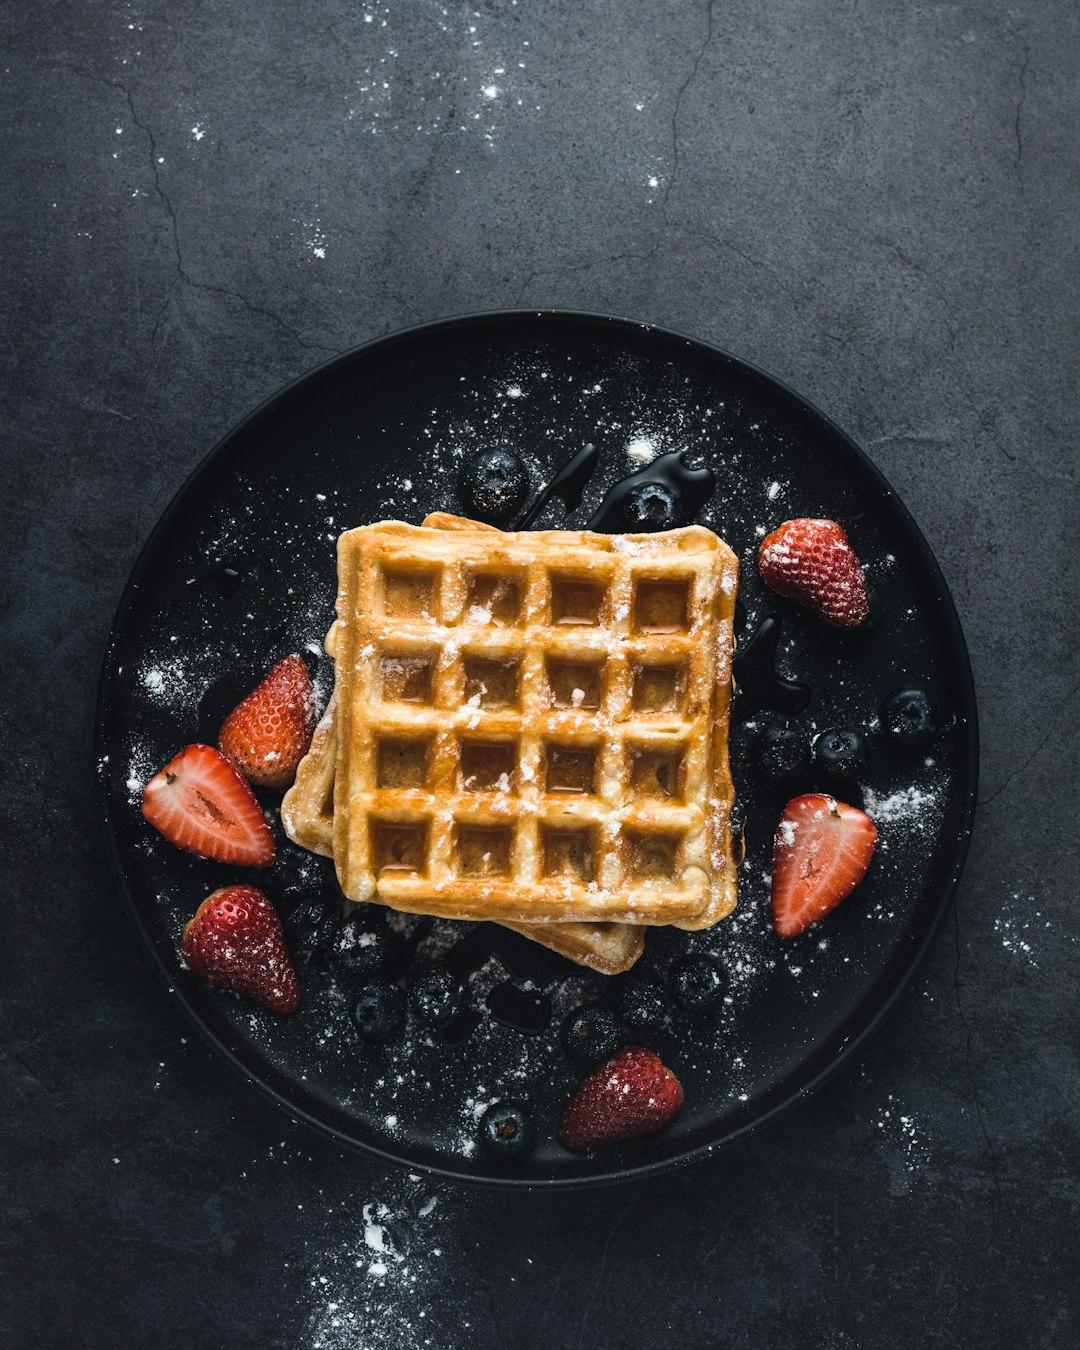 Waffles with strawberries and blueberries